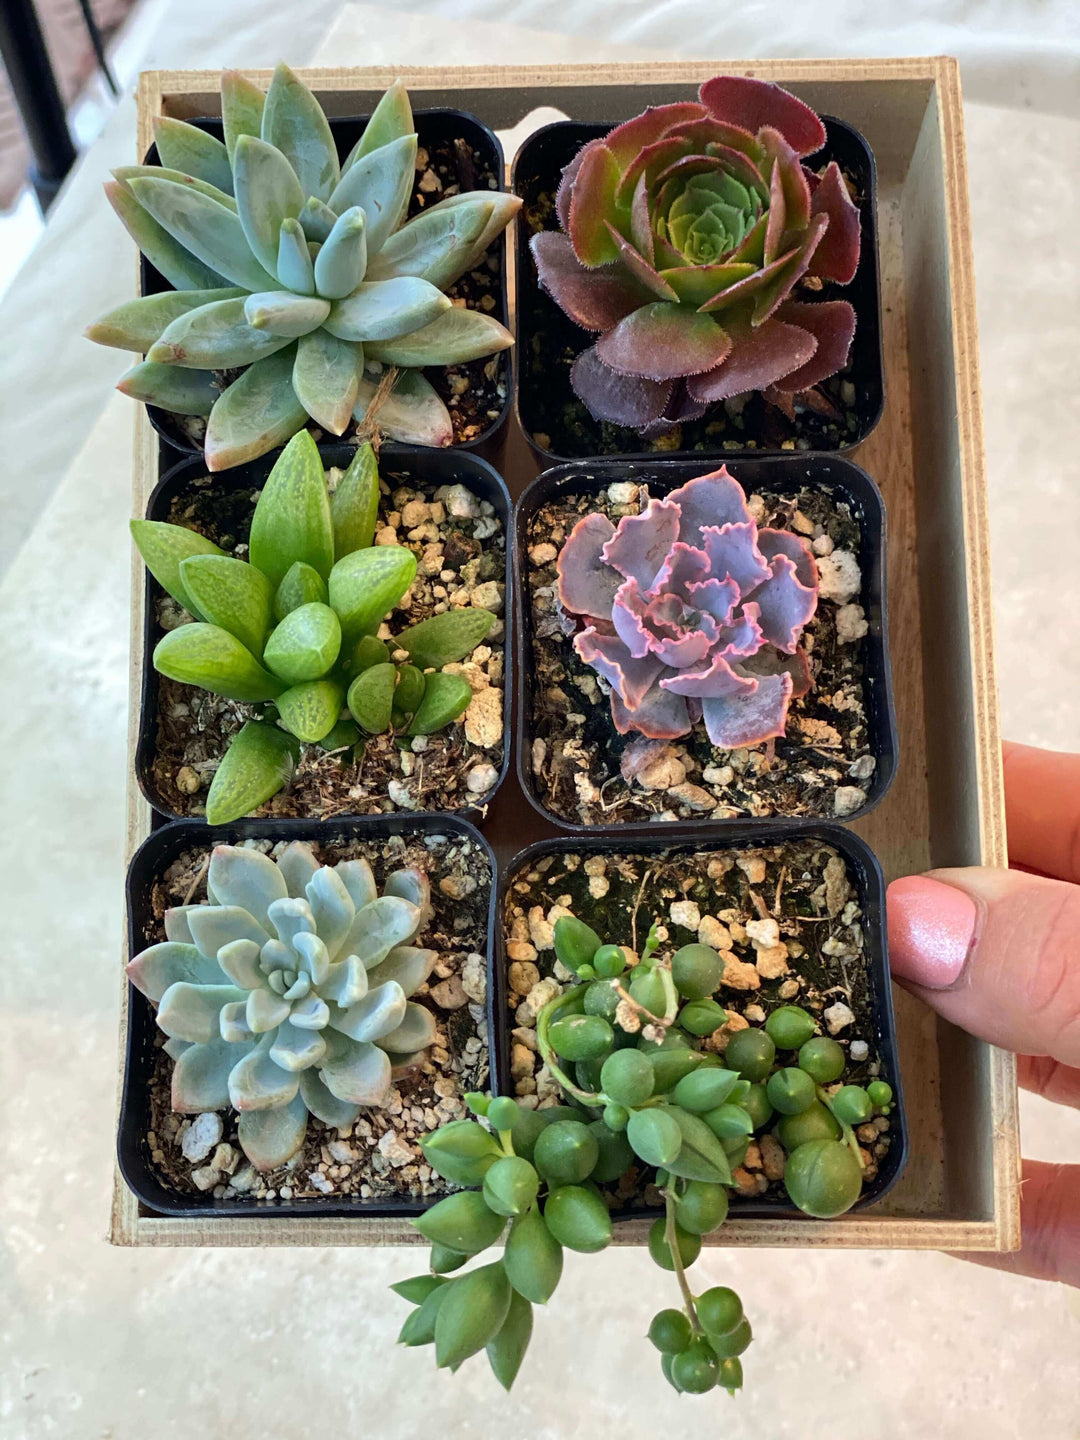 Assortment of six 2-inch succulents in small pots, displaying a range of green hues and leaf textures.